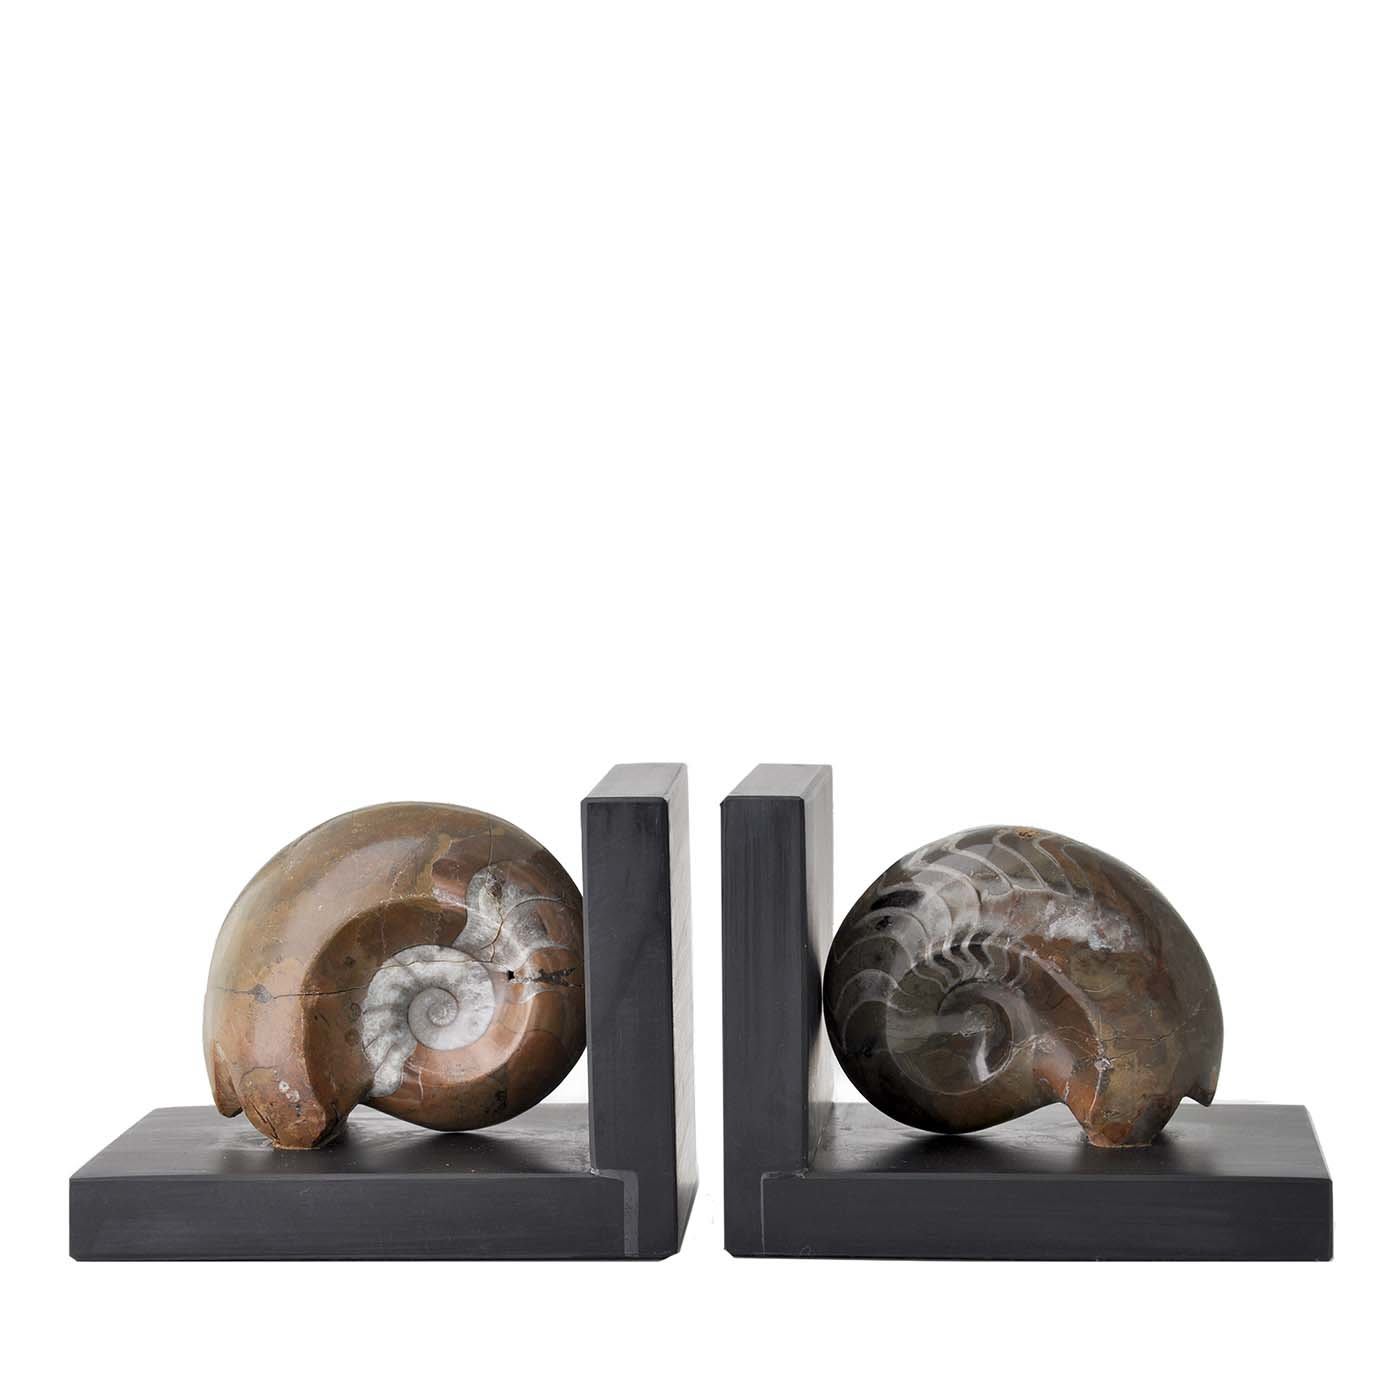 Fossiline Brown Shell Bookends by Nino Basso - Design Center 1991